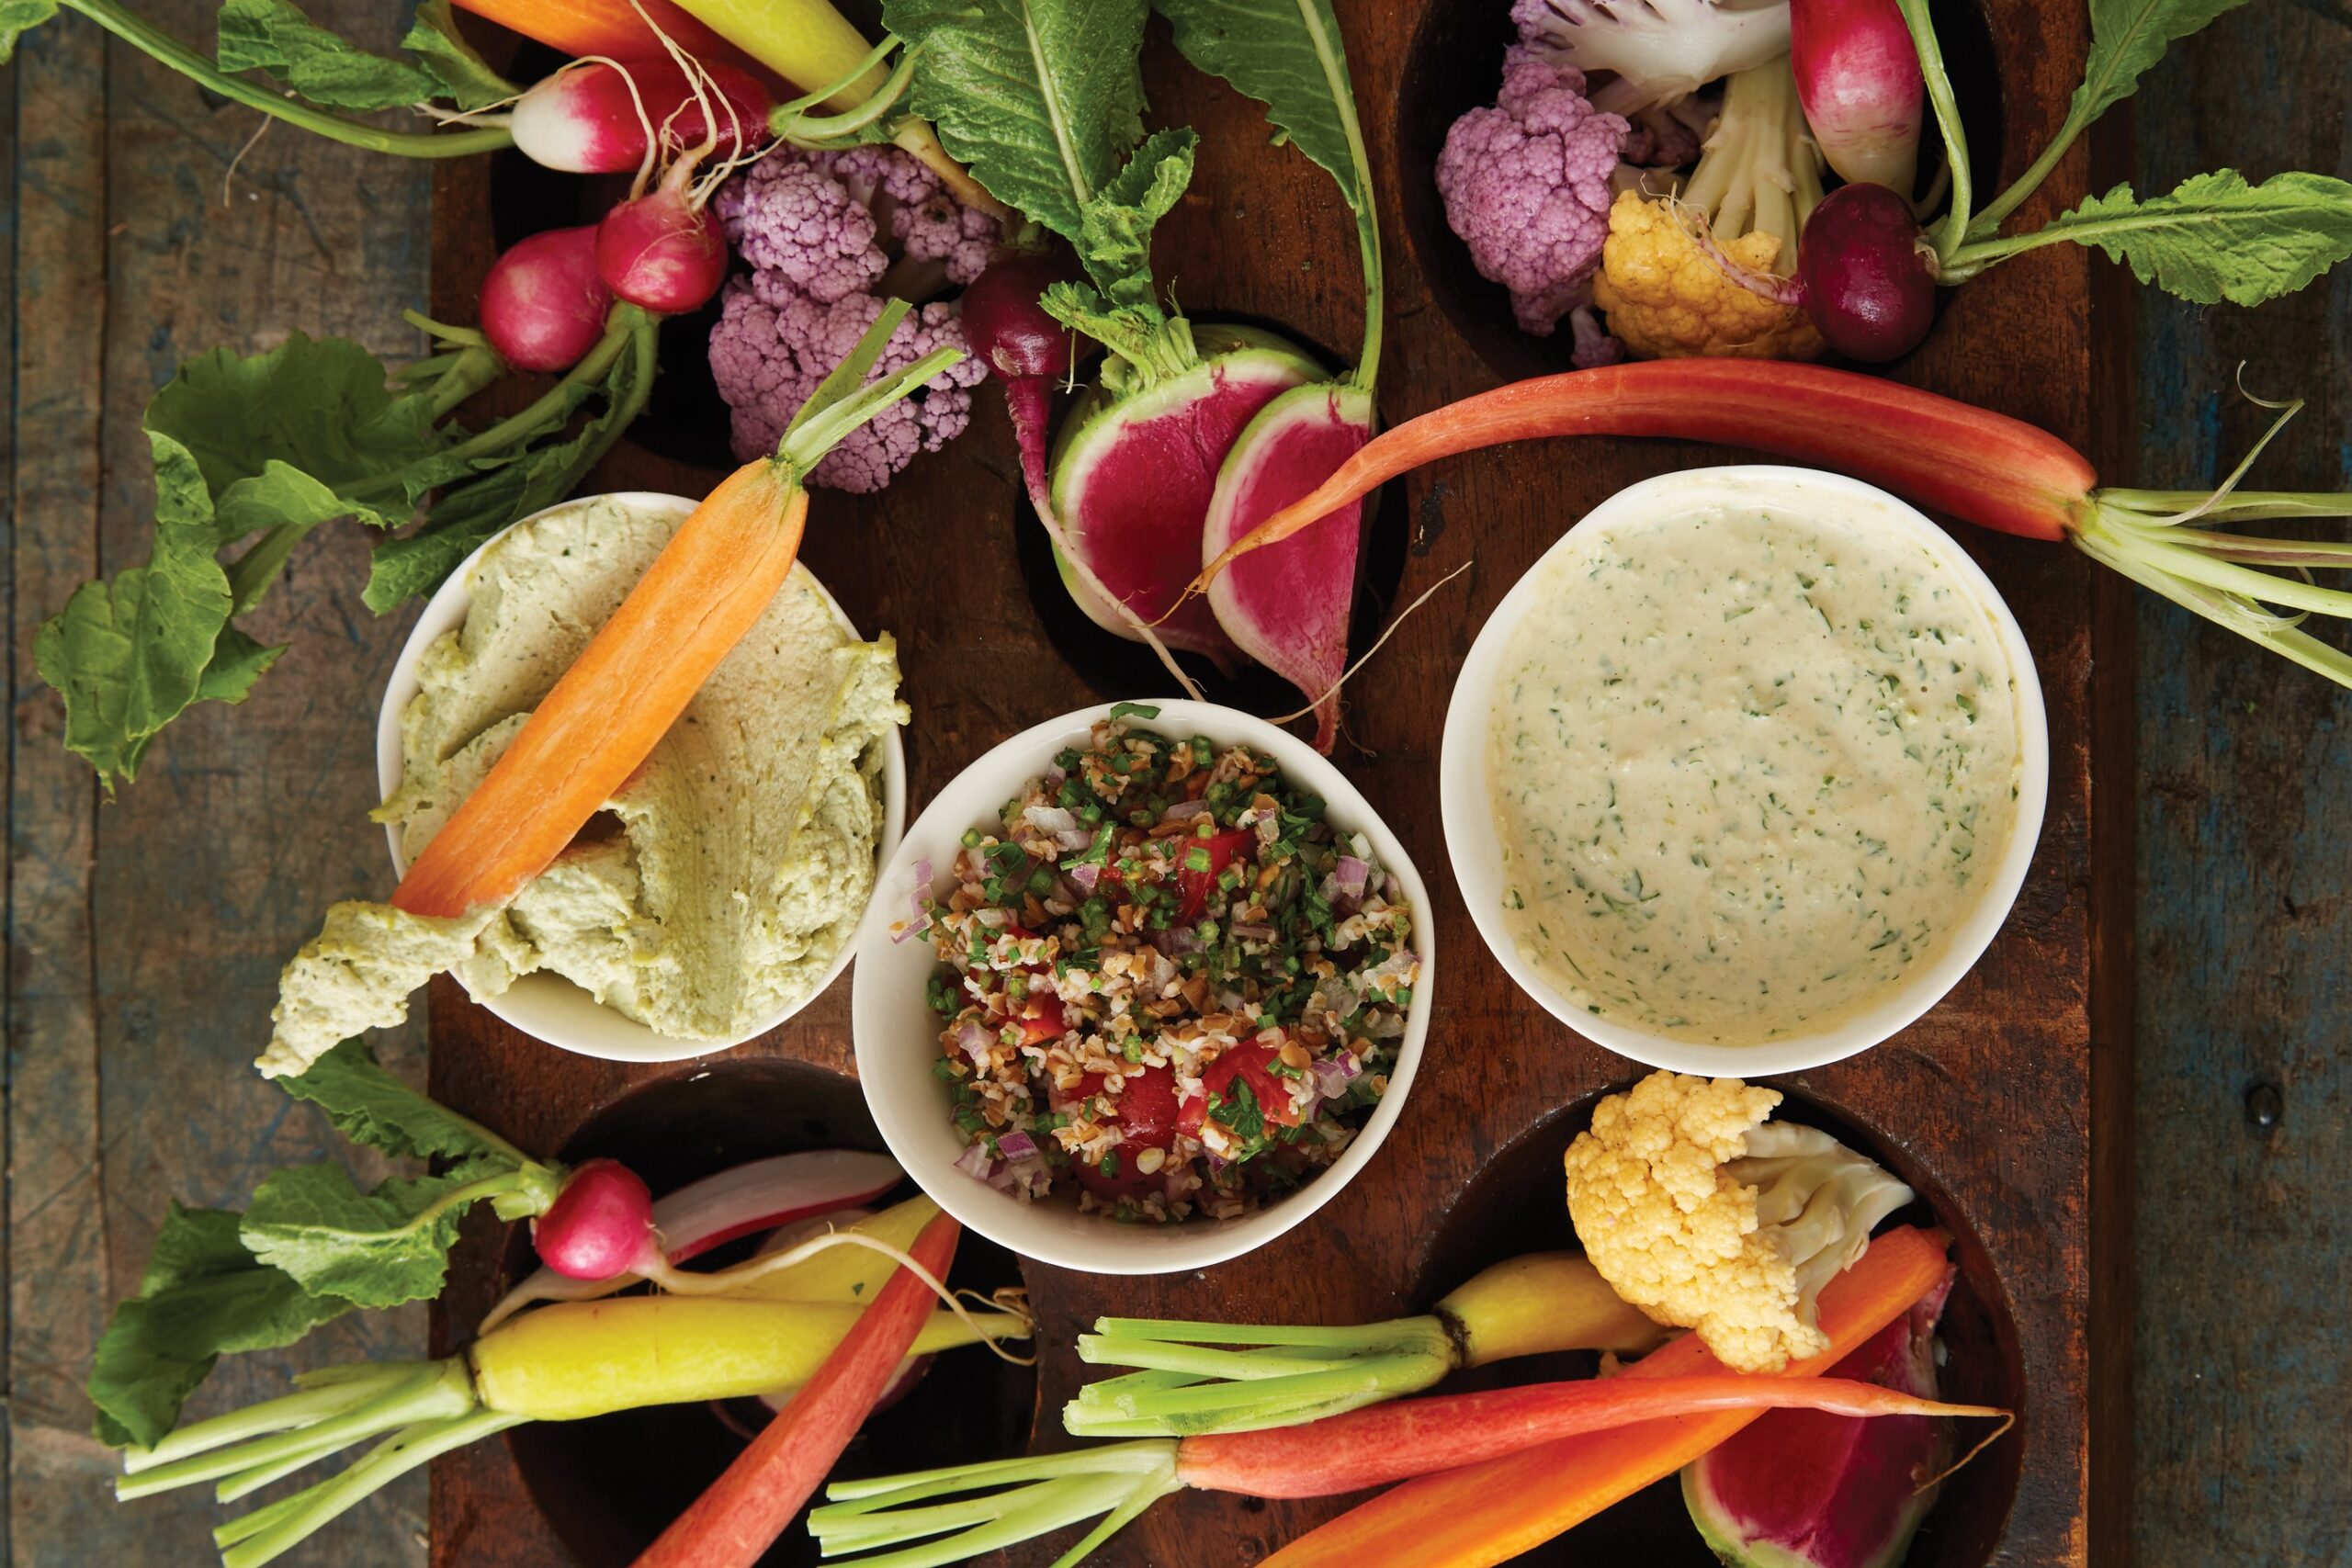 A spread of vegetables and various dips, including Kale Stem Hummus